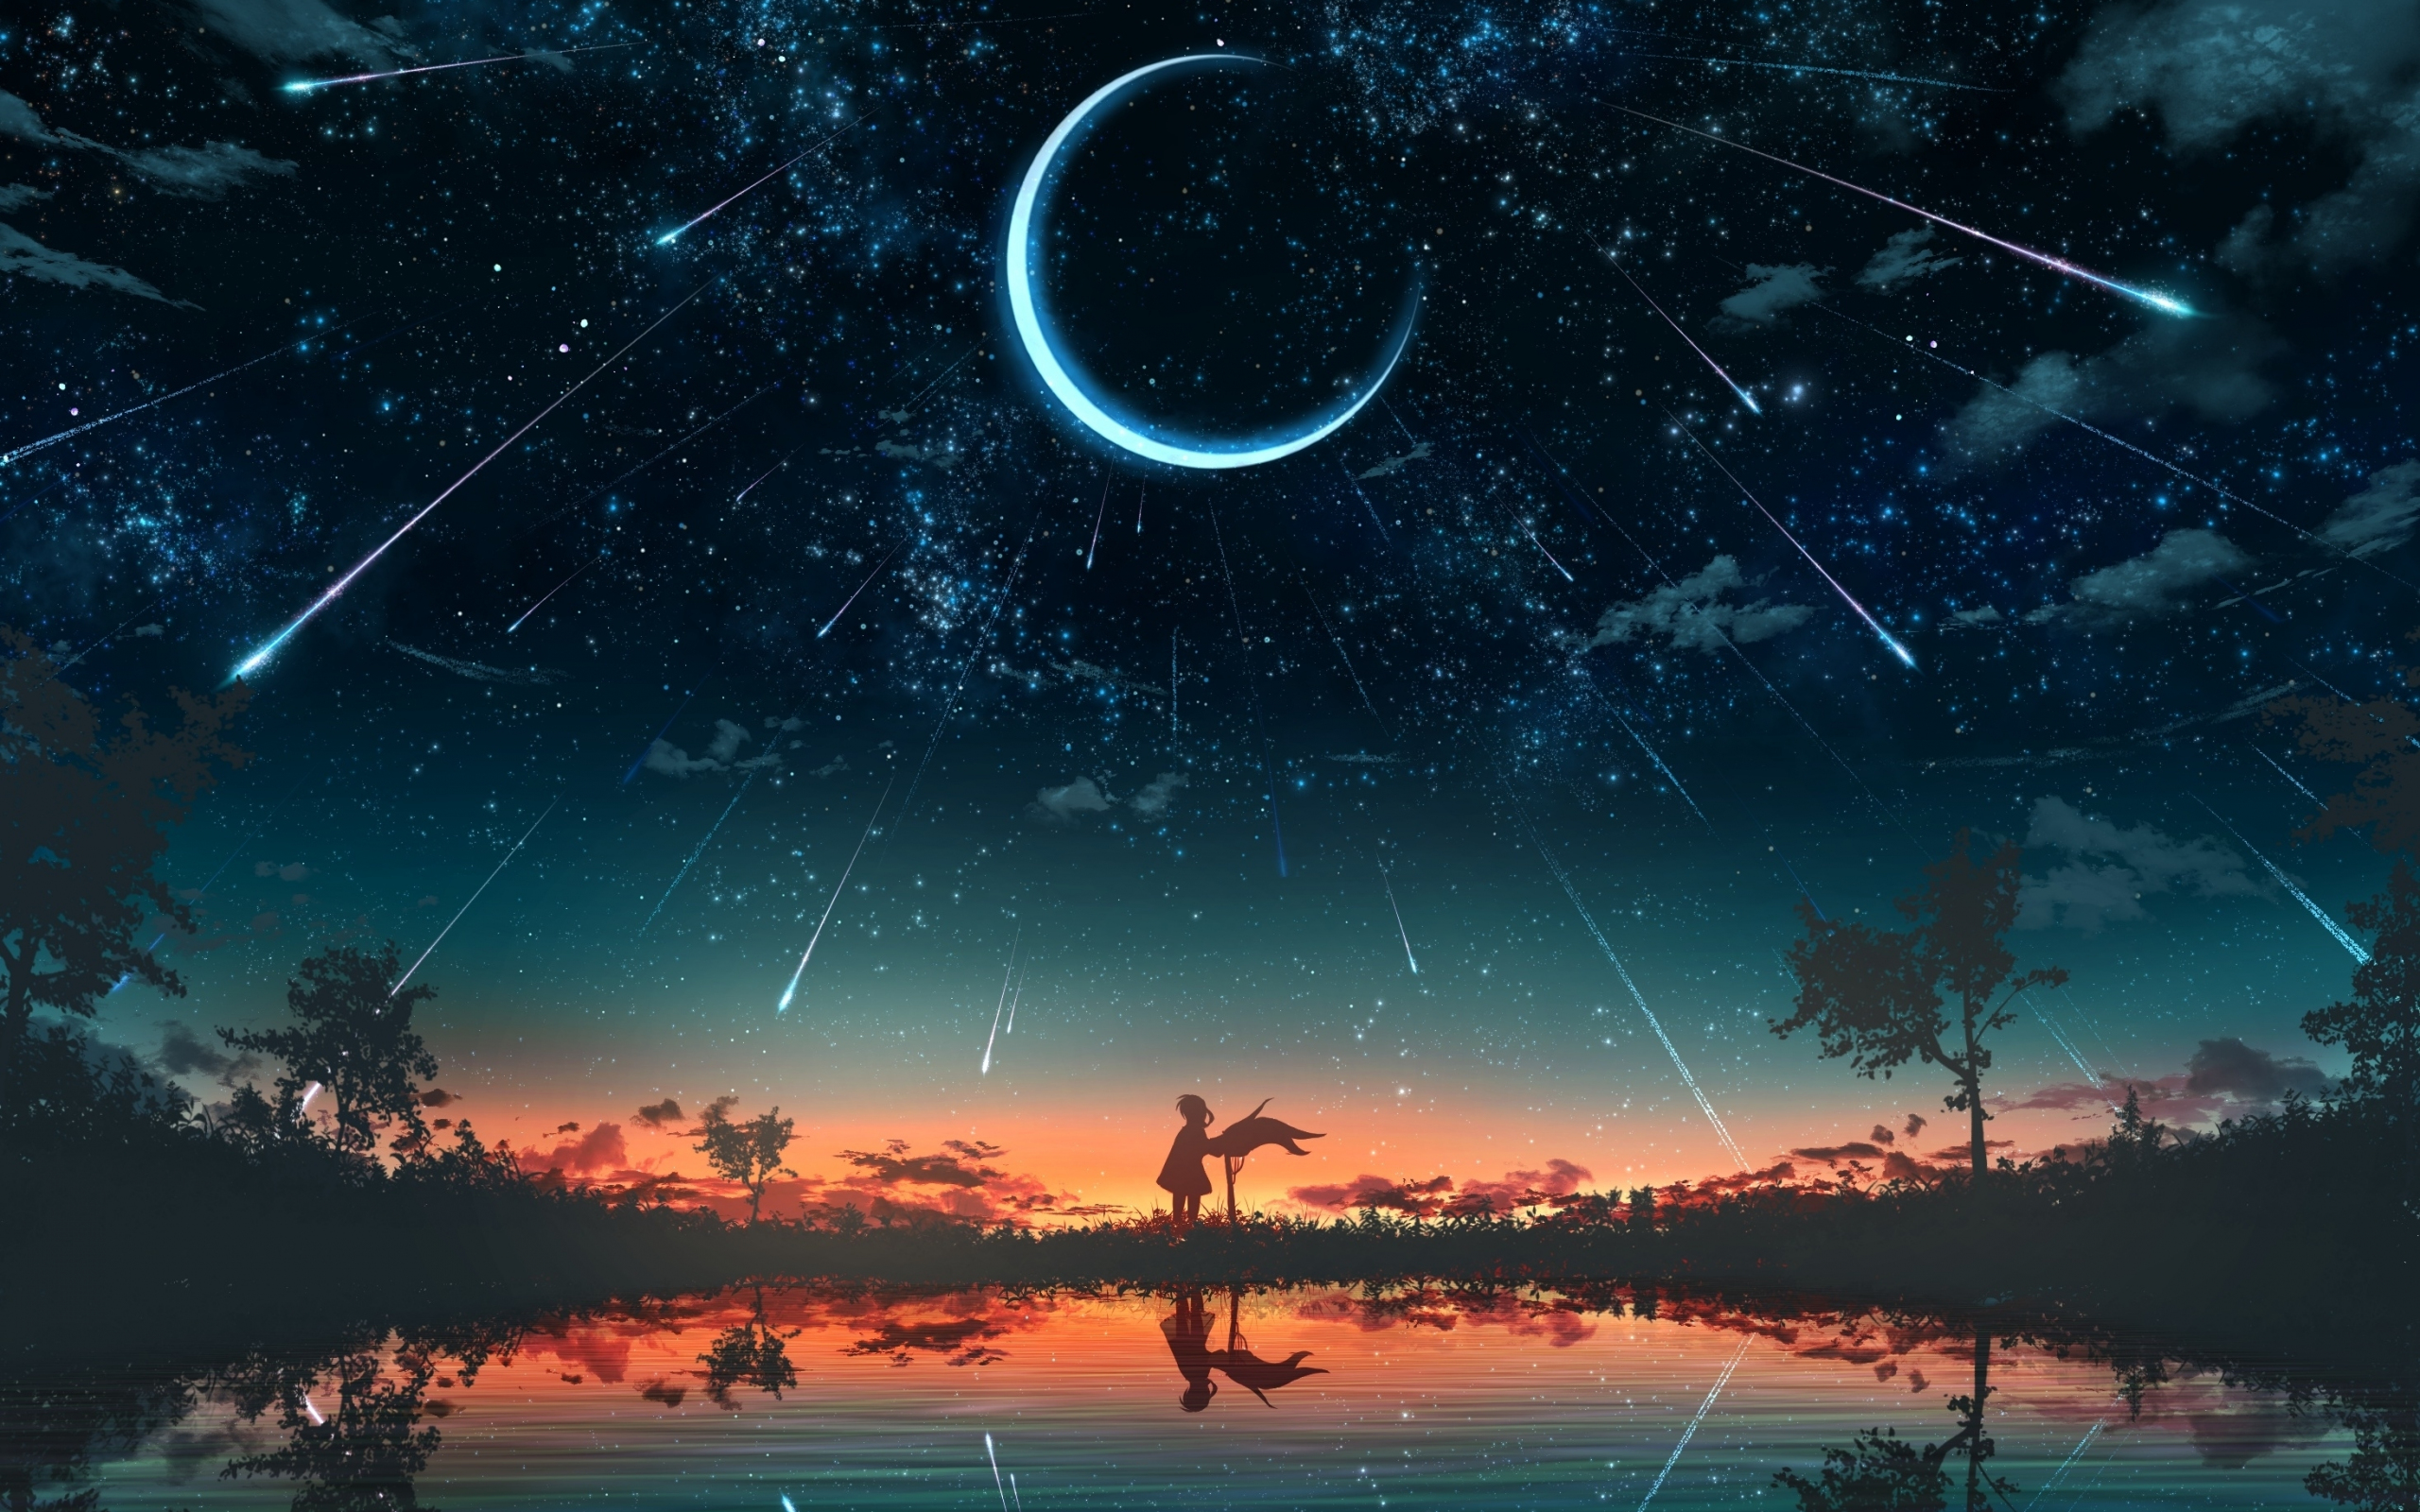 Download wallpaper 2560x1600 anime, original, night, crescent, silhouette,  star trails, dual wide 16:10 2560x1600 hd background, 24904